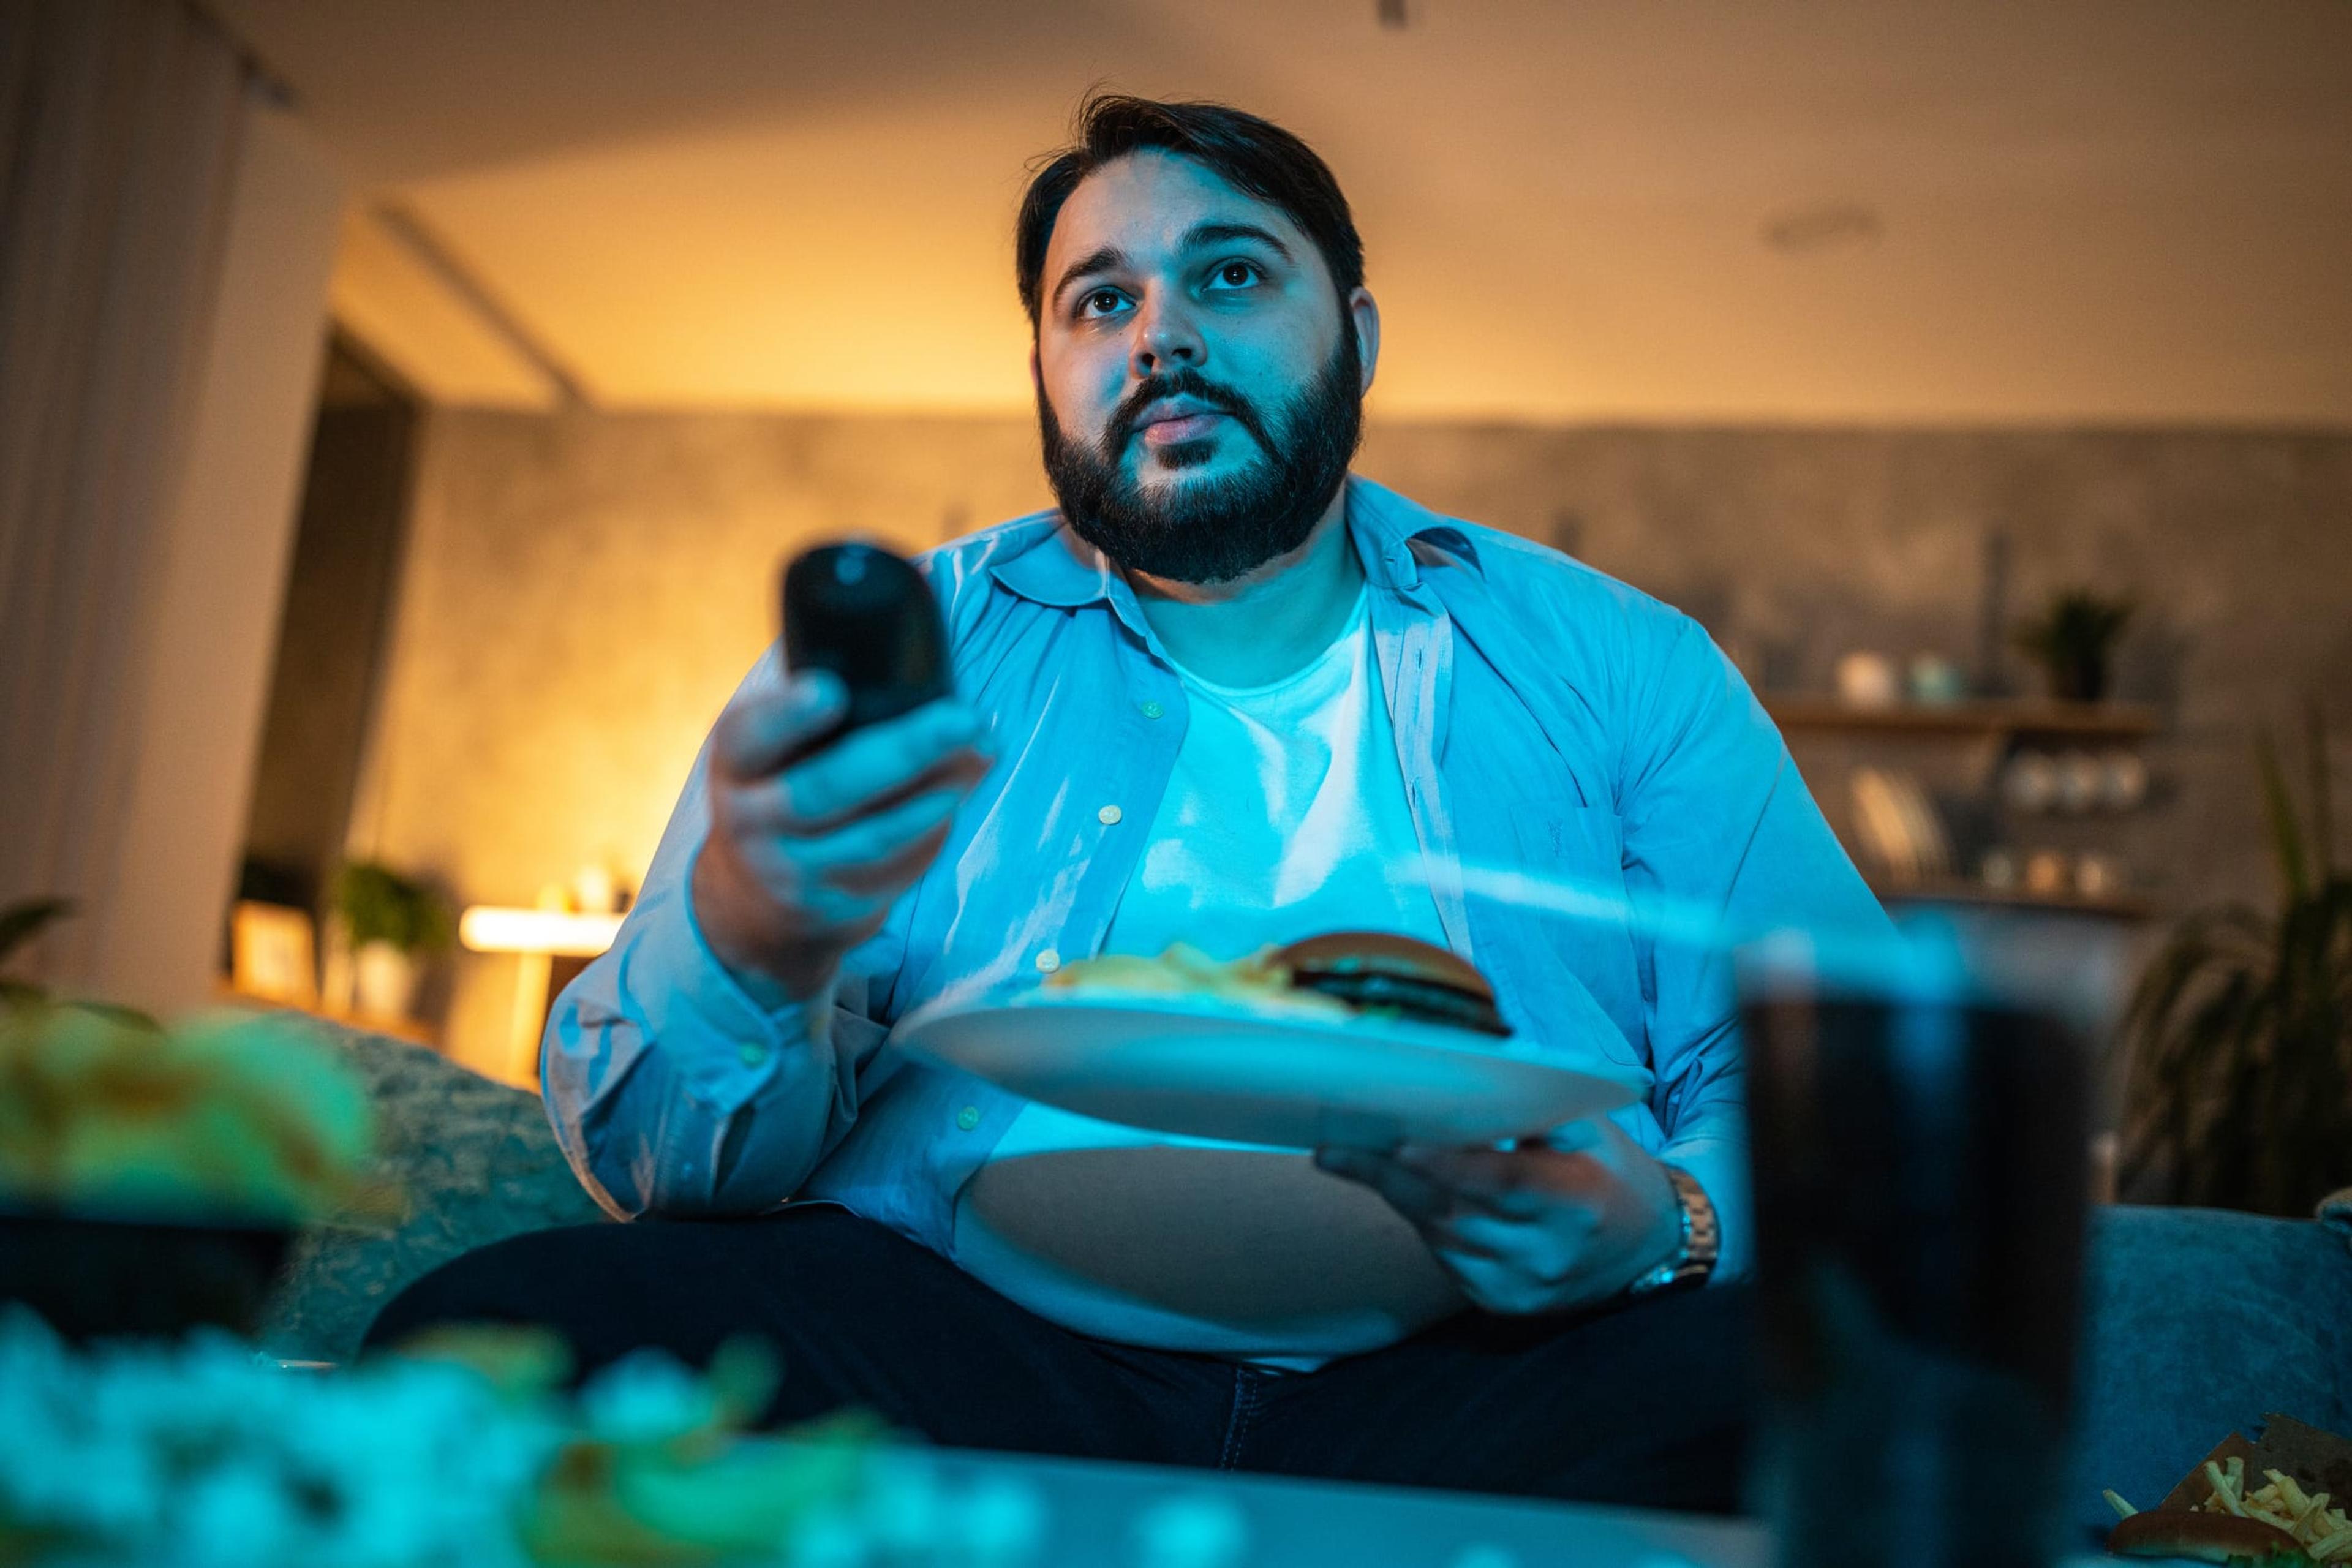 Man sitting in front of TV eating dinner